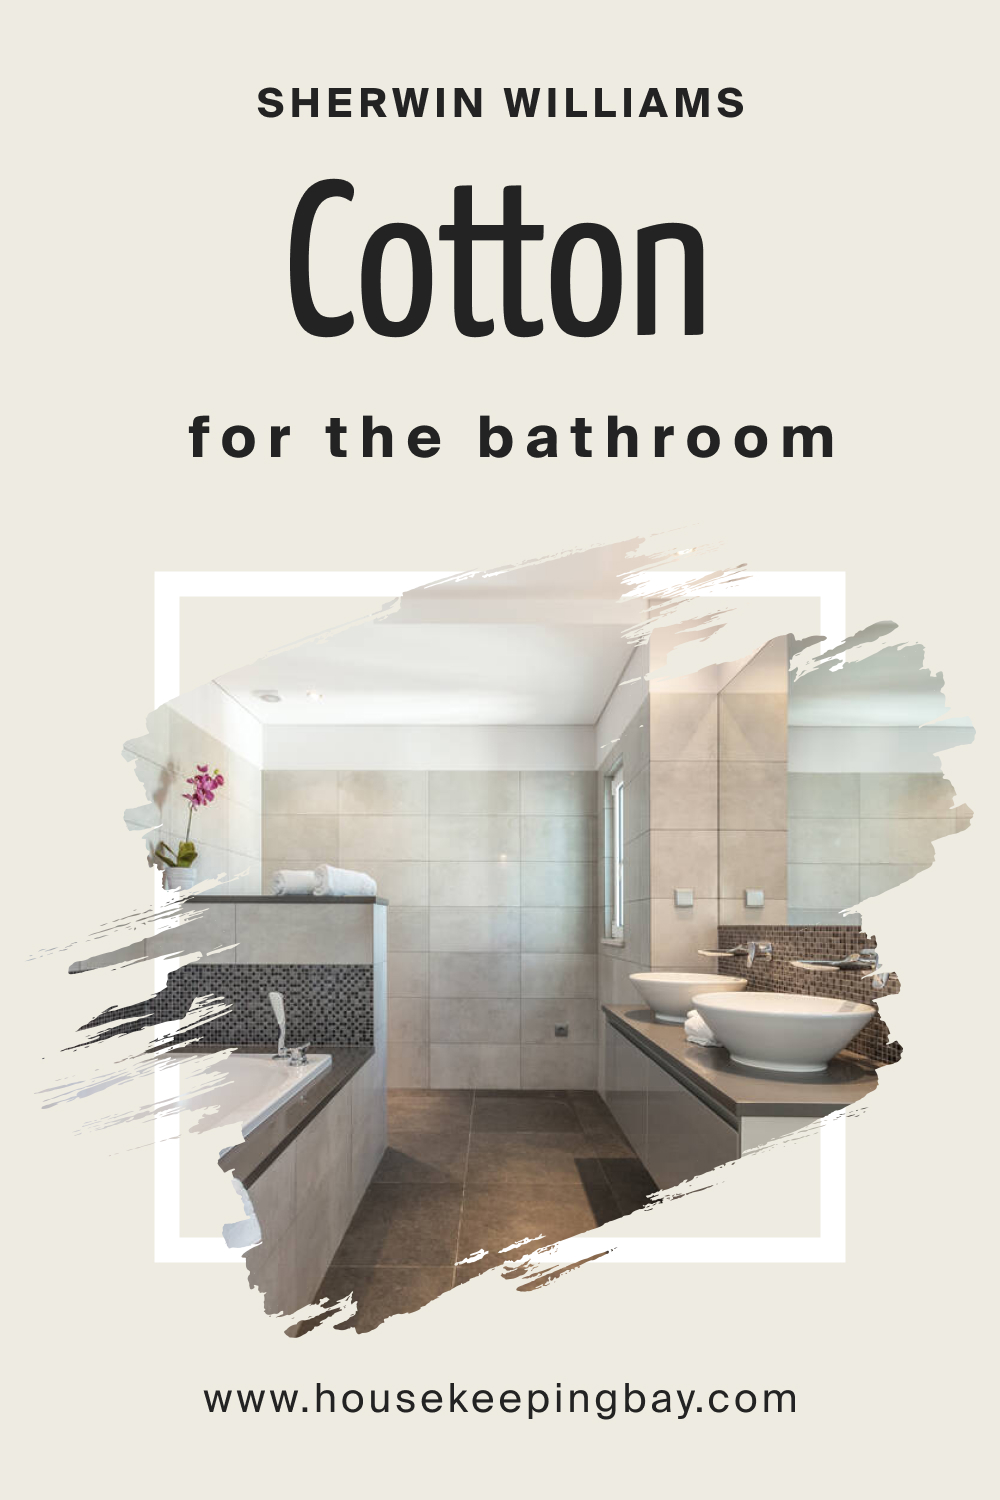 Sherwin Williams. SW 9581 Cotton For the Bathroom